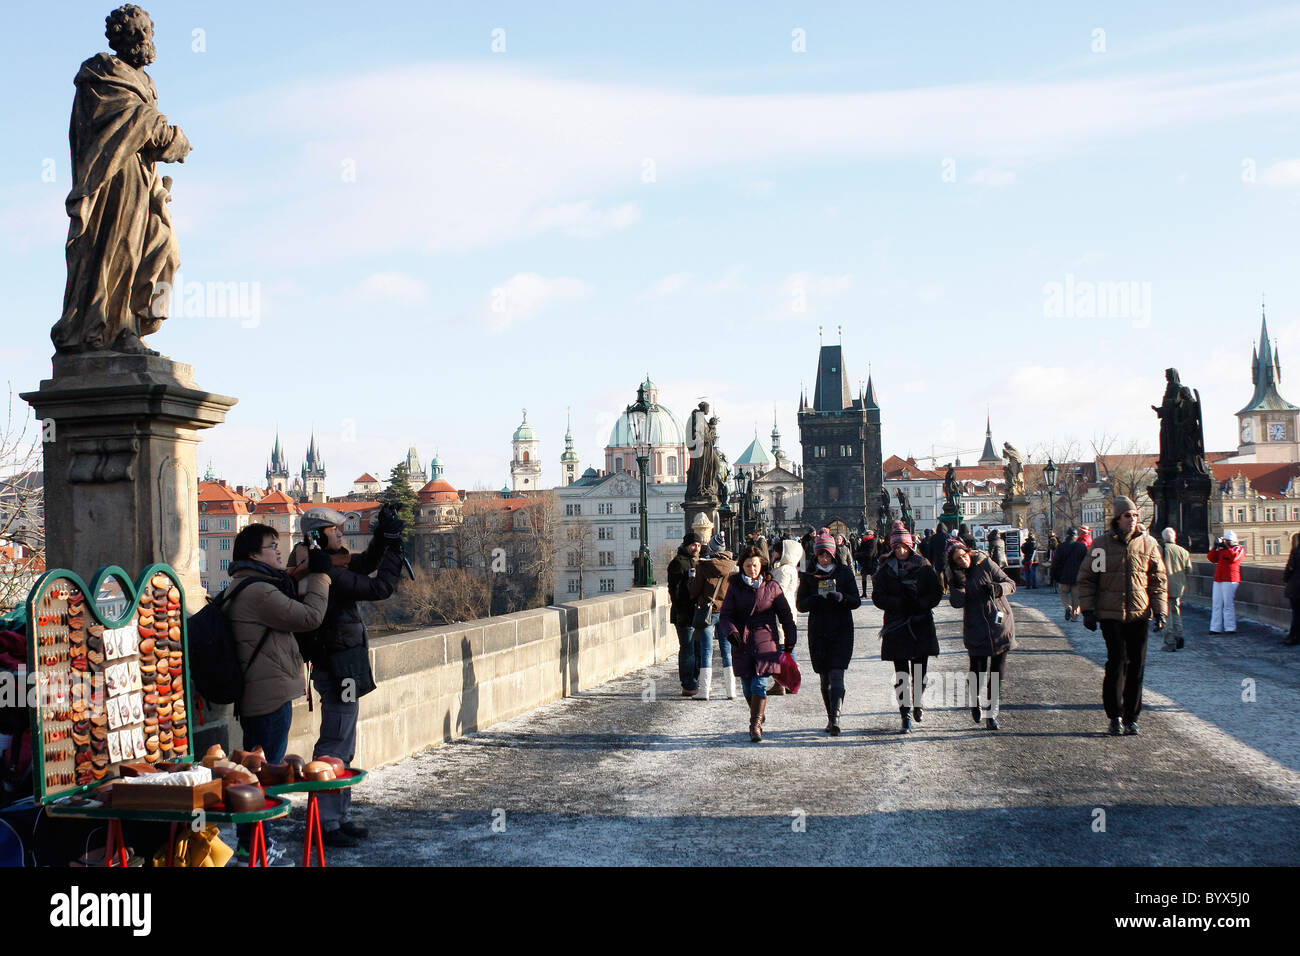 The historic Charles Bridge over the Vitava River,Prague,busy with artists and tourists throughout the year. Stock Photo